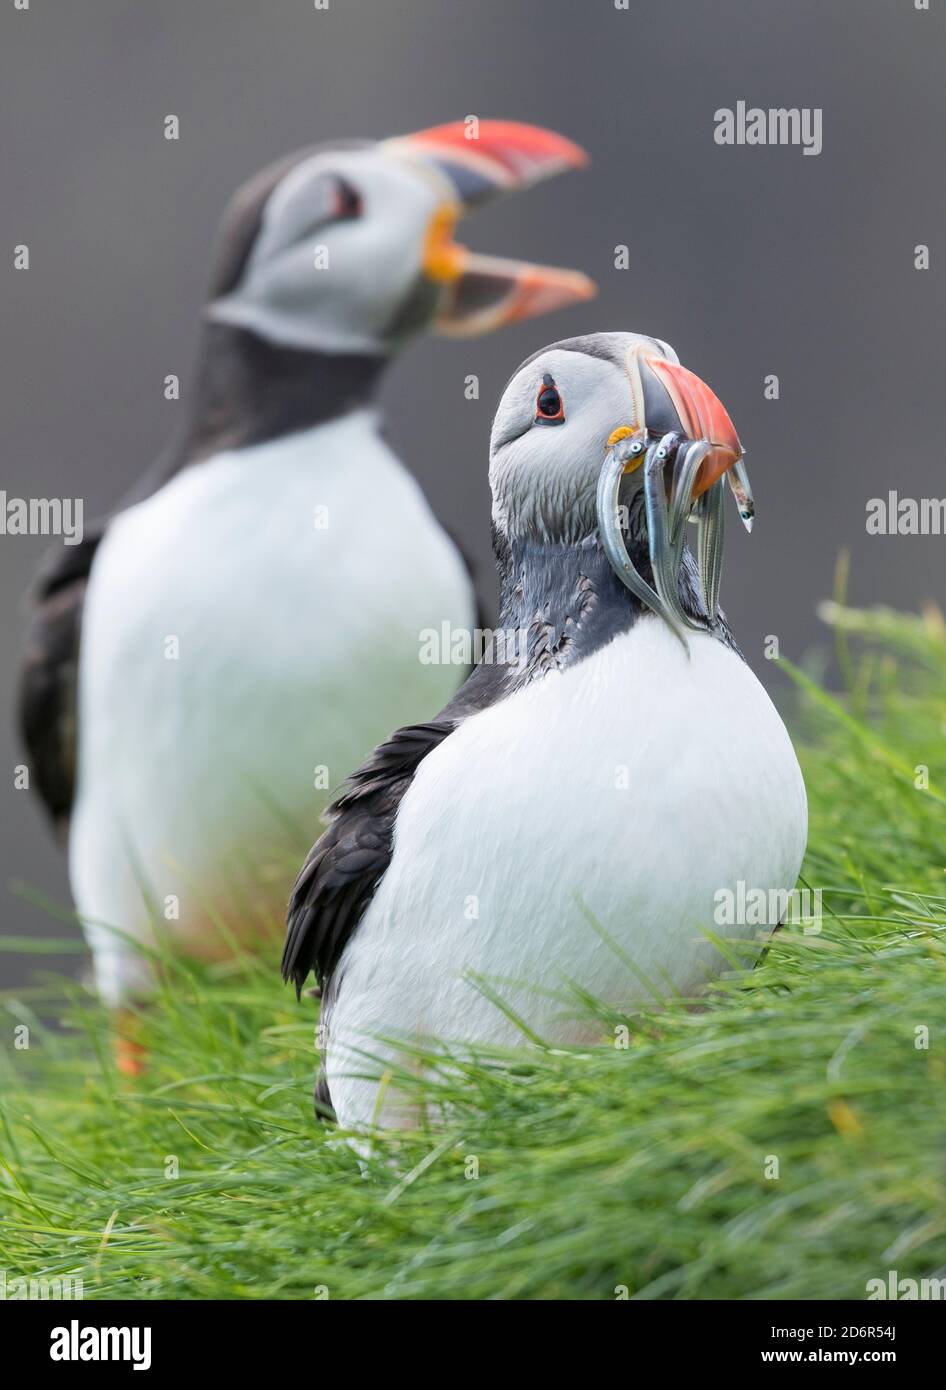 Atlantic Puffin (Fratercula arctica) in a puffinry on Mykines, part of the Faroe Islands in the North Atlantic. Catch of fish (sandeel) in its beak, D Stock Photo